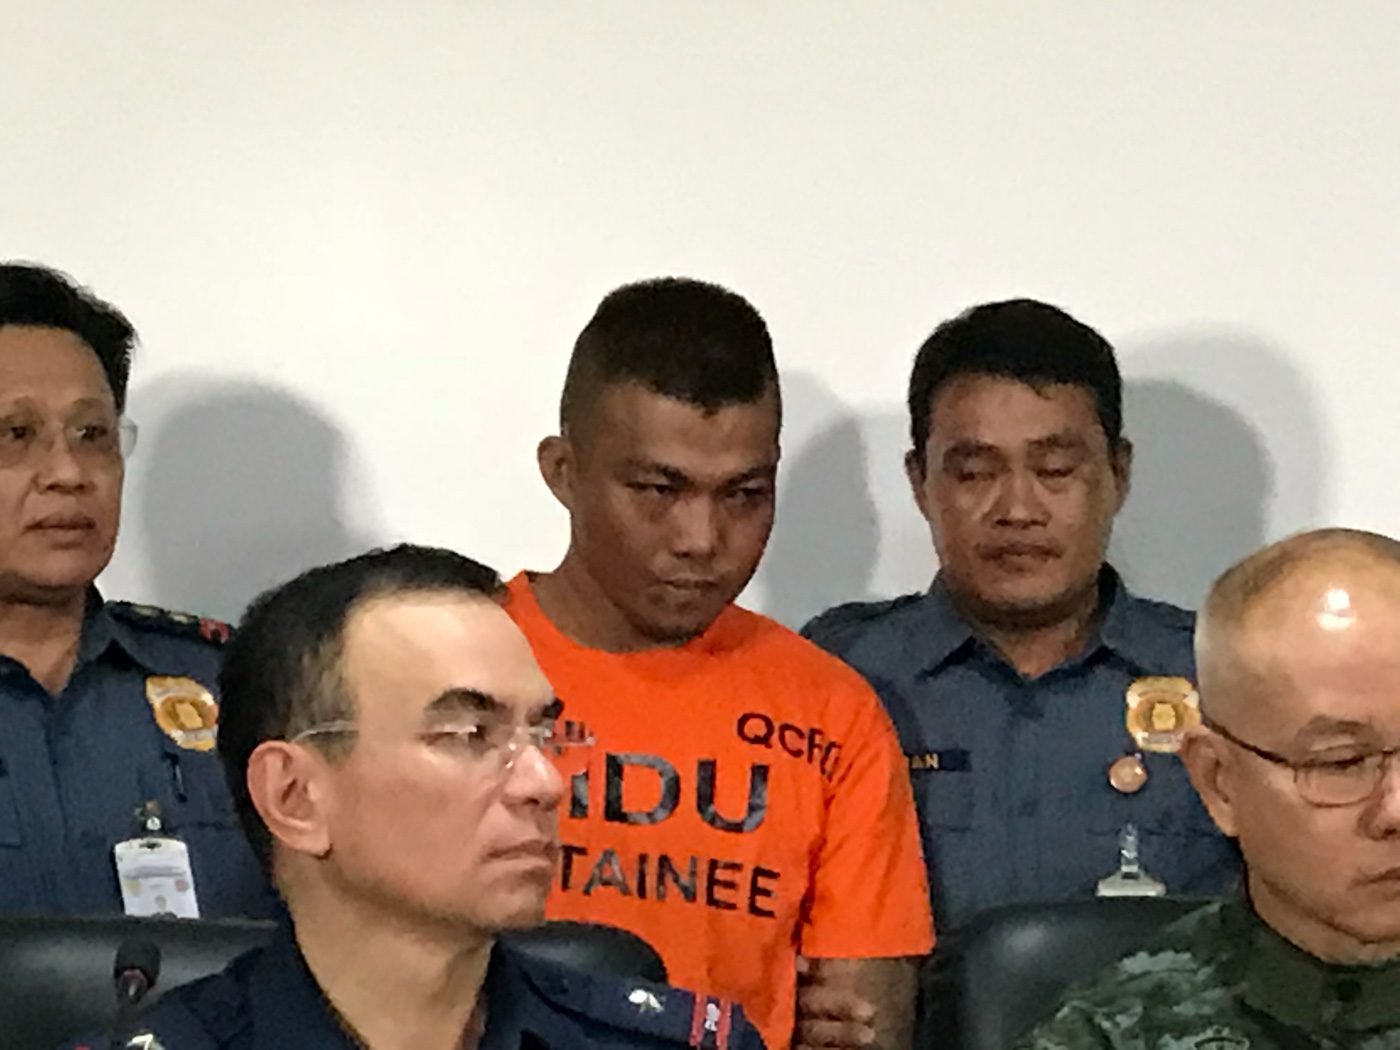 Ombudsman prosecutor Tanyag robbed, killed by suspect to get drug fix – PNP